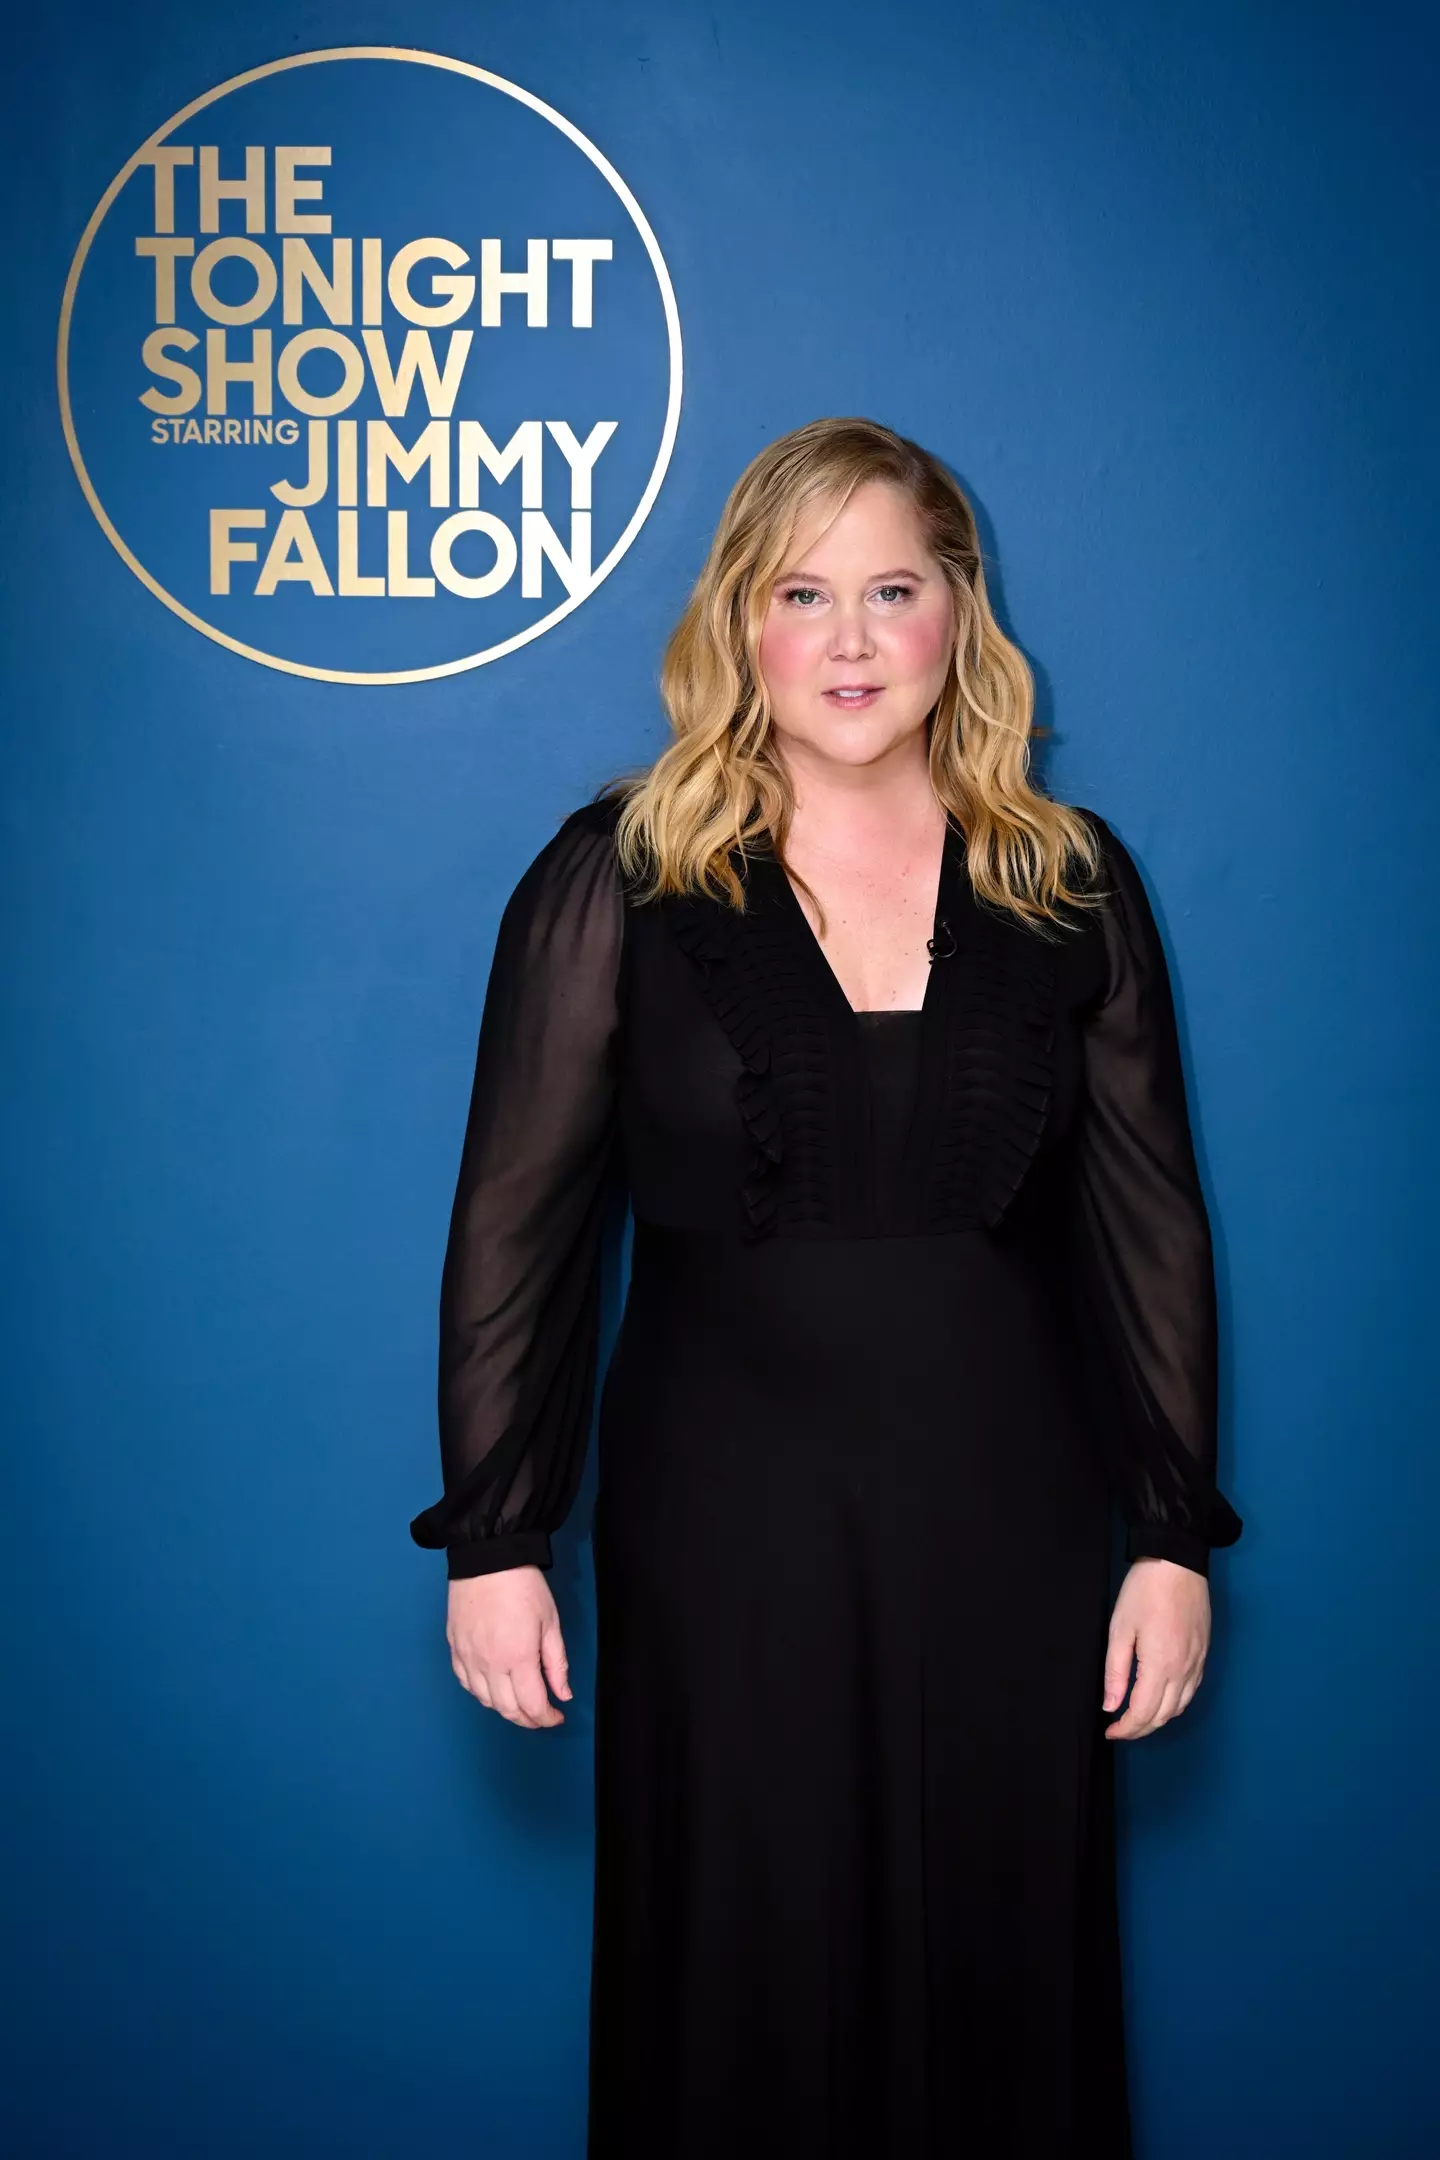 Amy Schumer shares a selfie featuring huge bruises on her shoulder